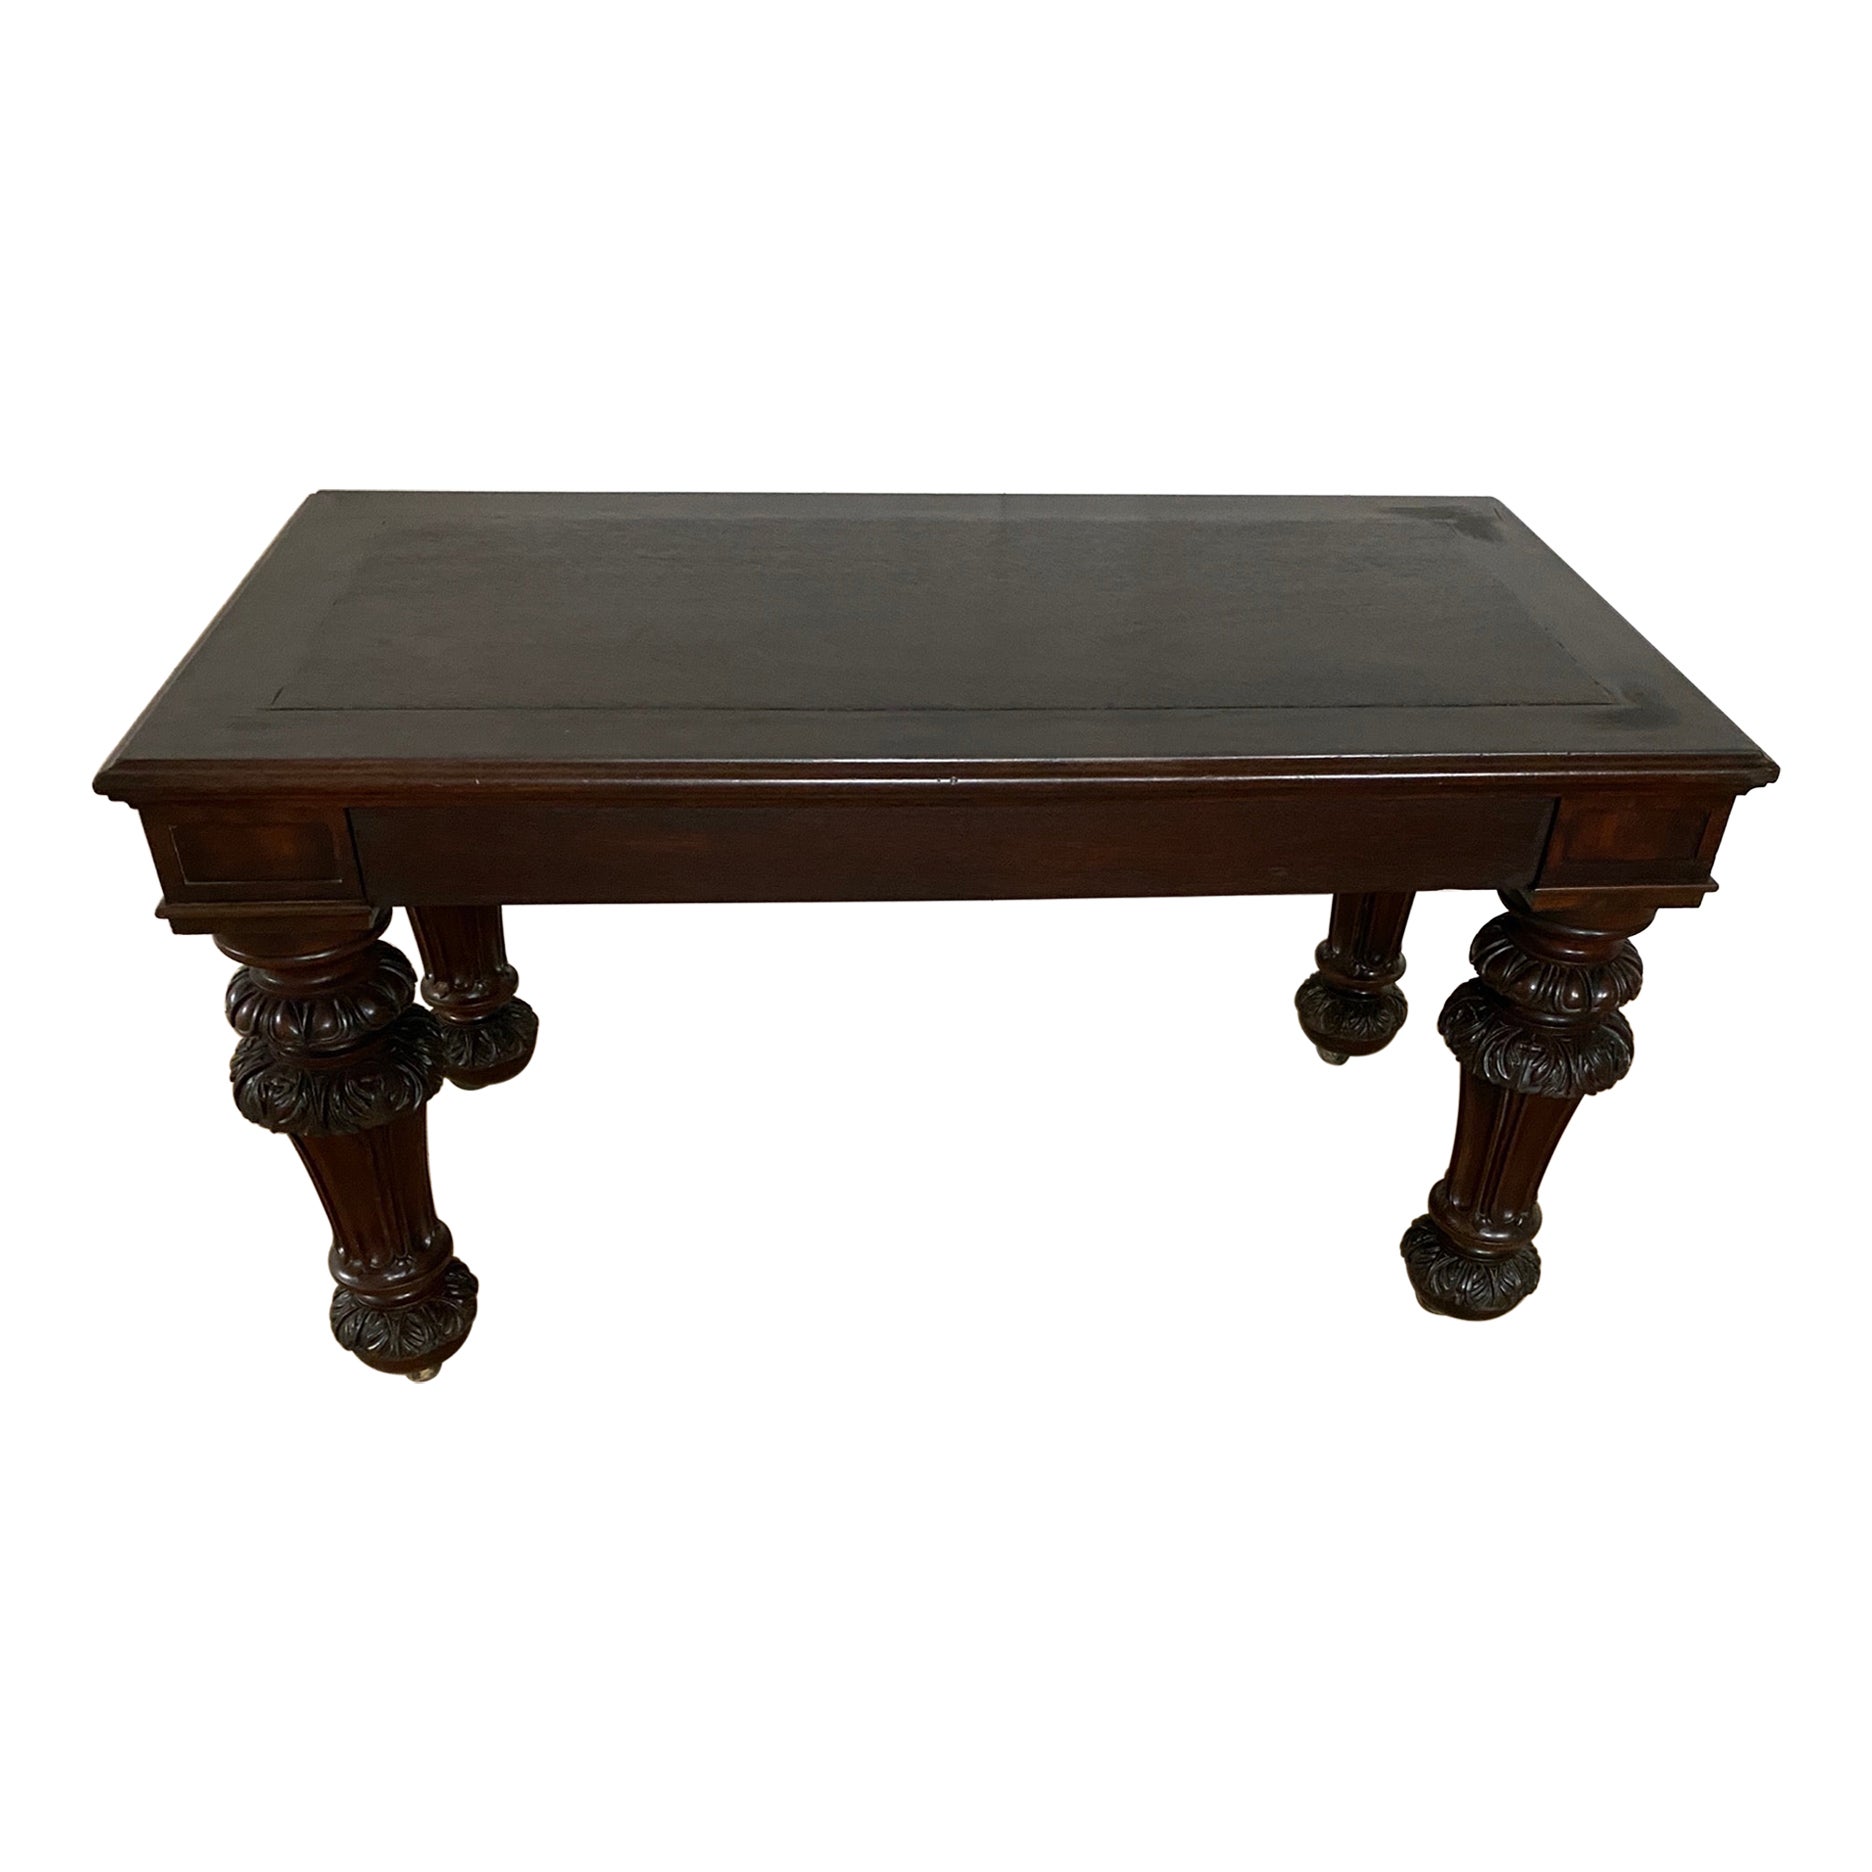 Tudor Revival Style Carved Coffee Table